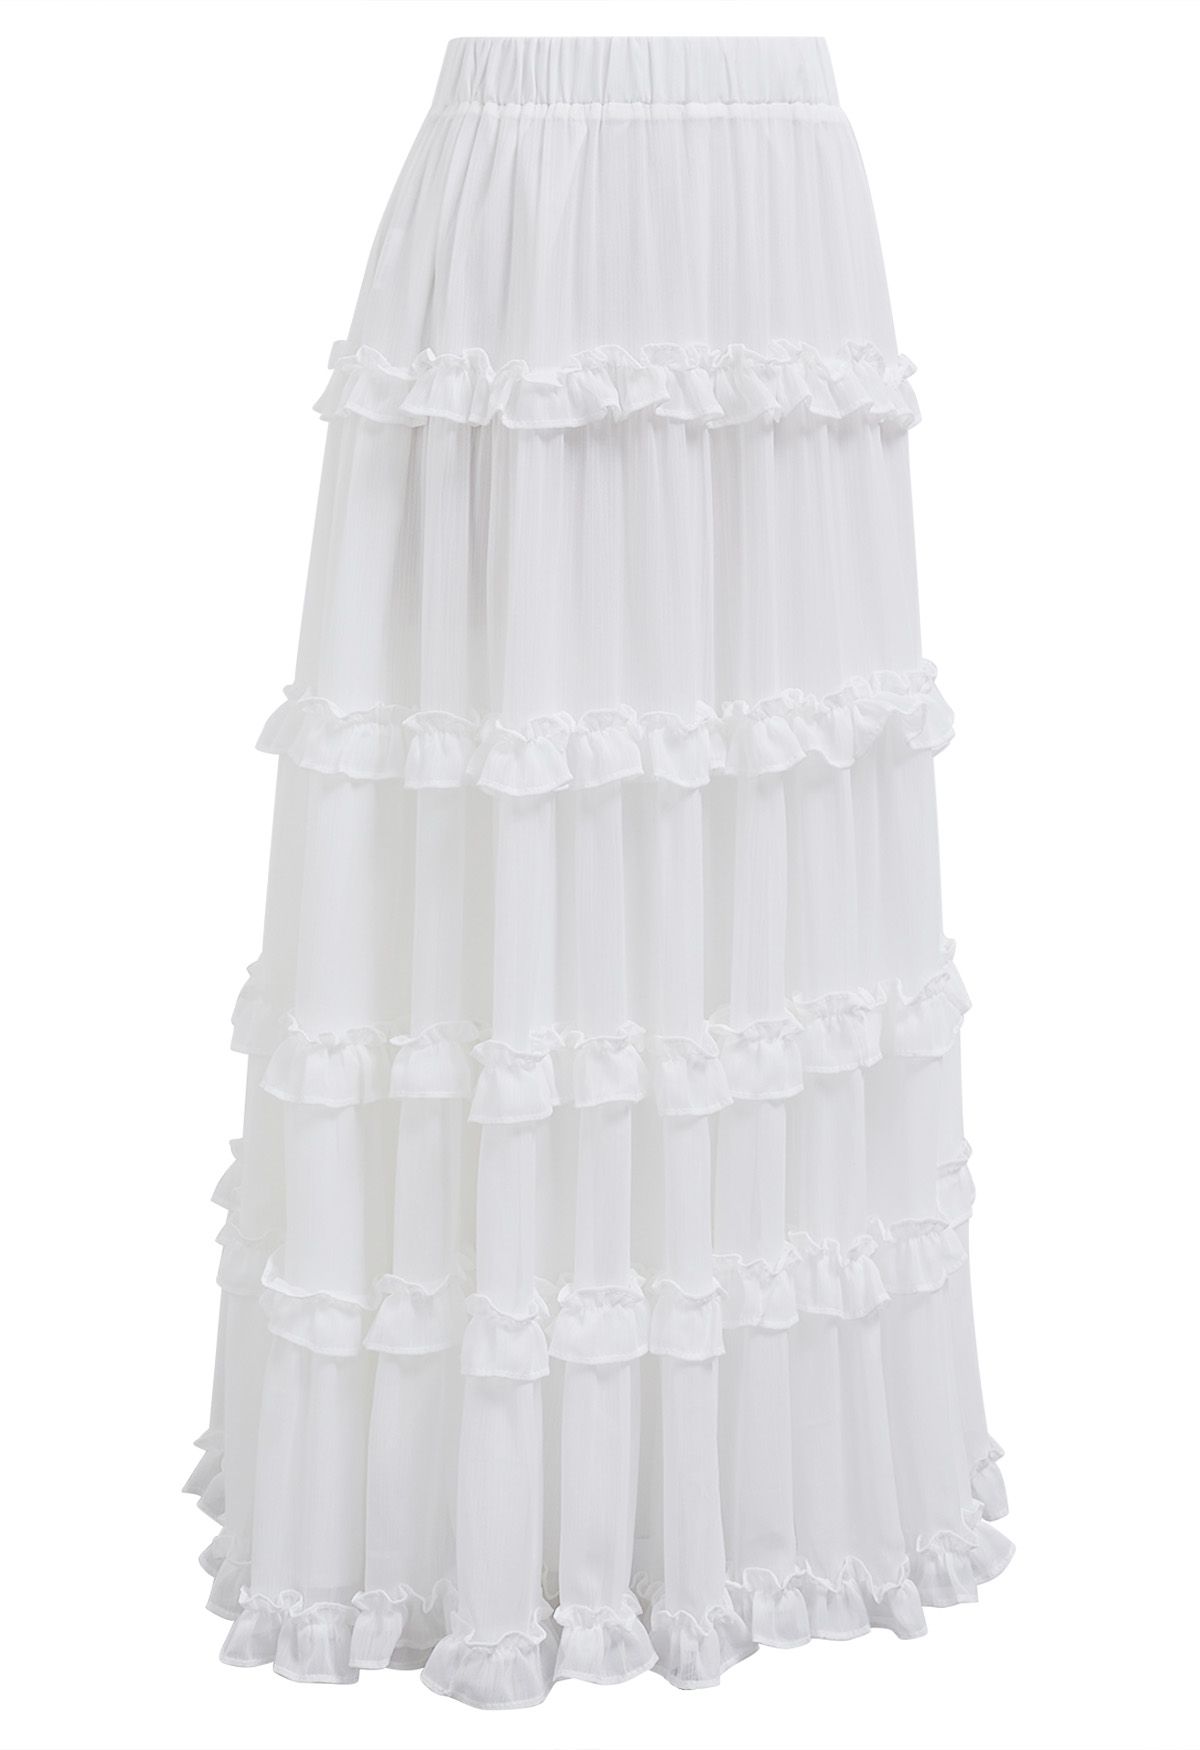 Adorable Ruffle Trim Flare Maxi Skirt in White